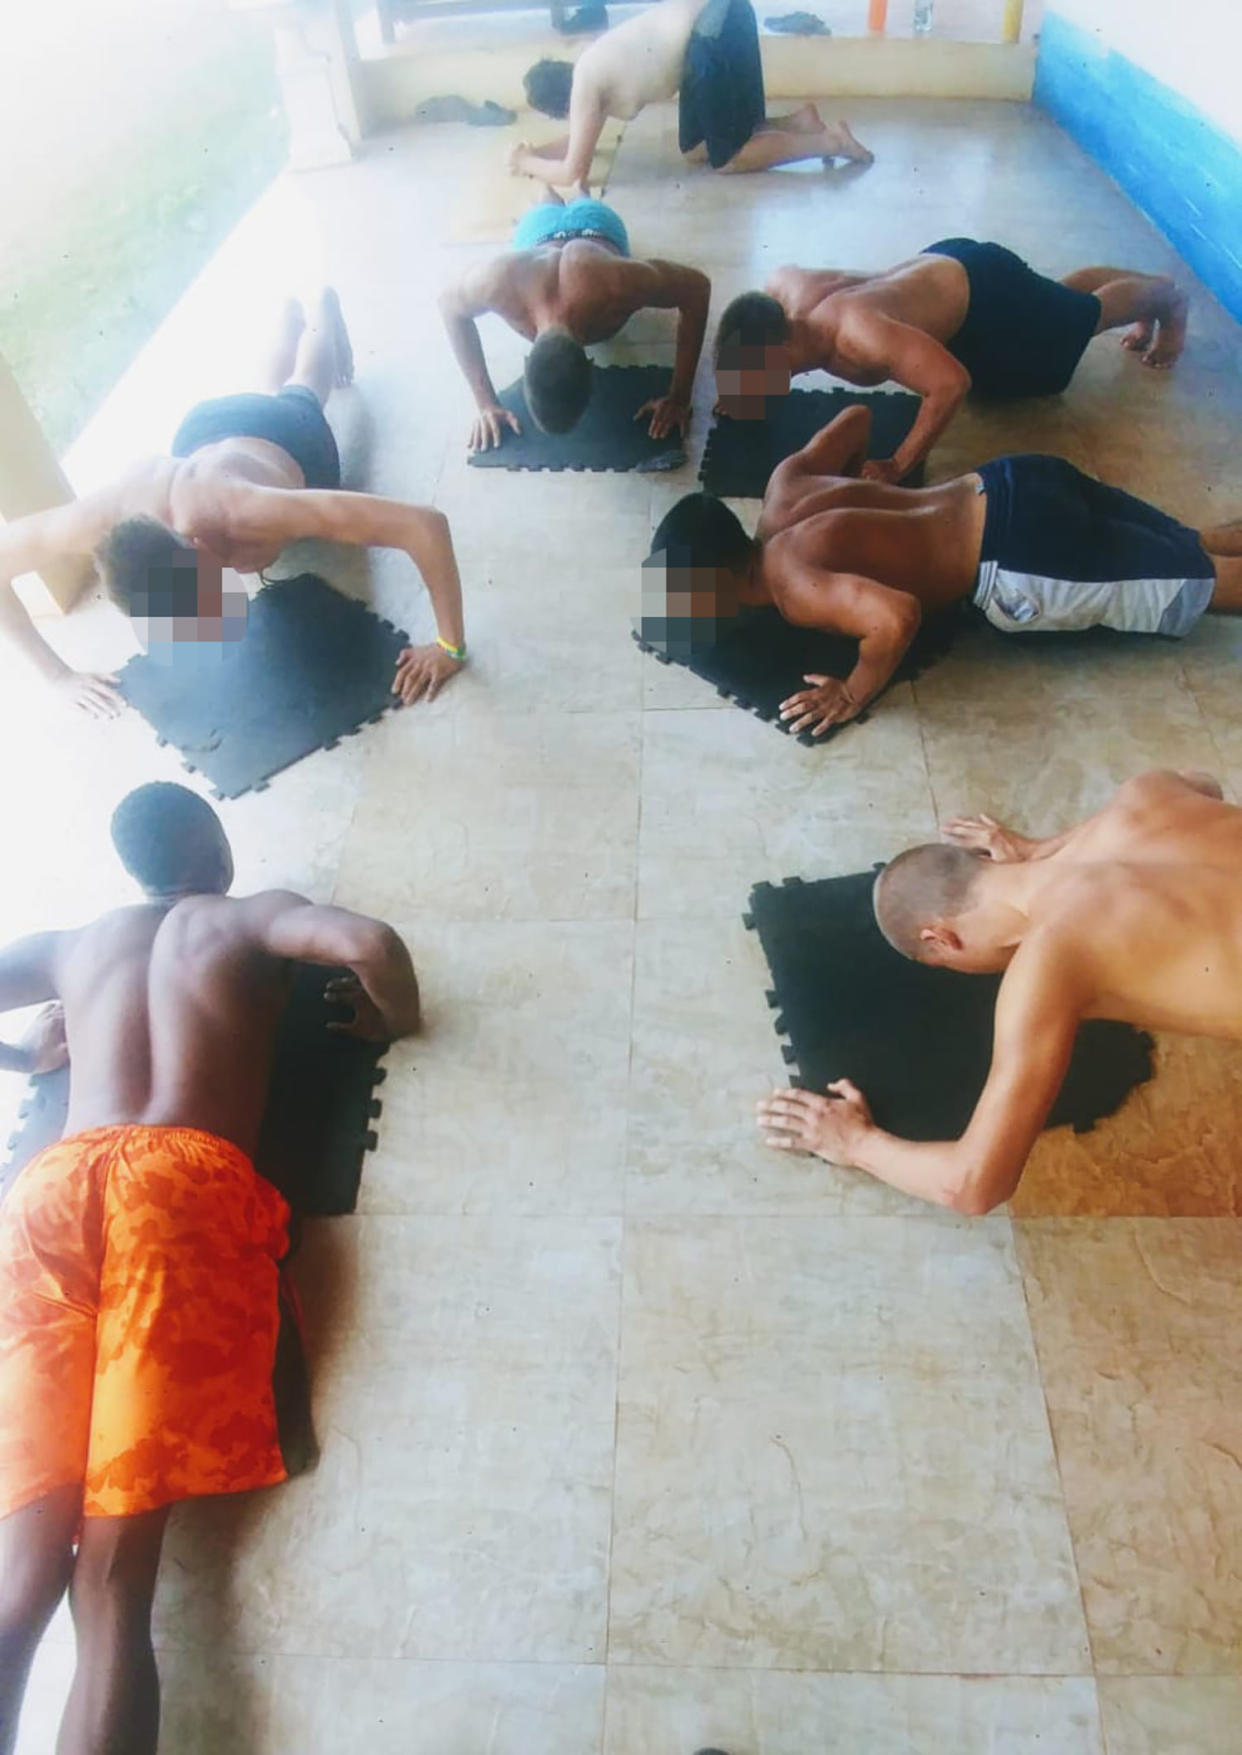 Boys do pushups at Atlantis Leadership Academy. Faces have been obscured by NBC News. (Obtained by NBC News)